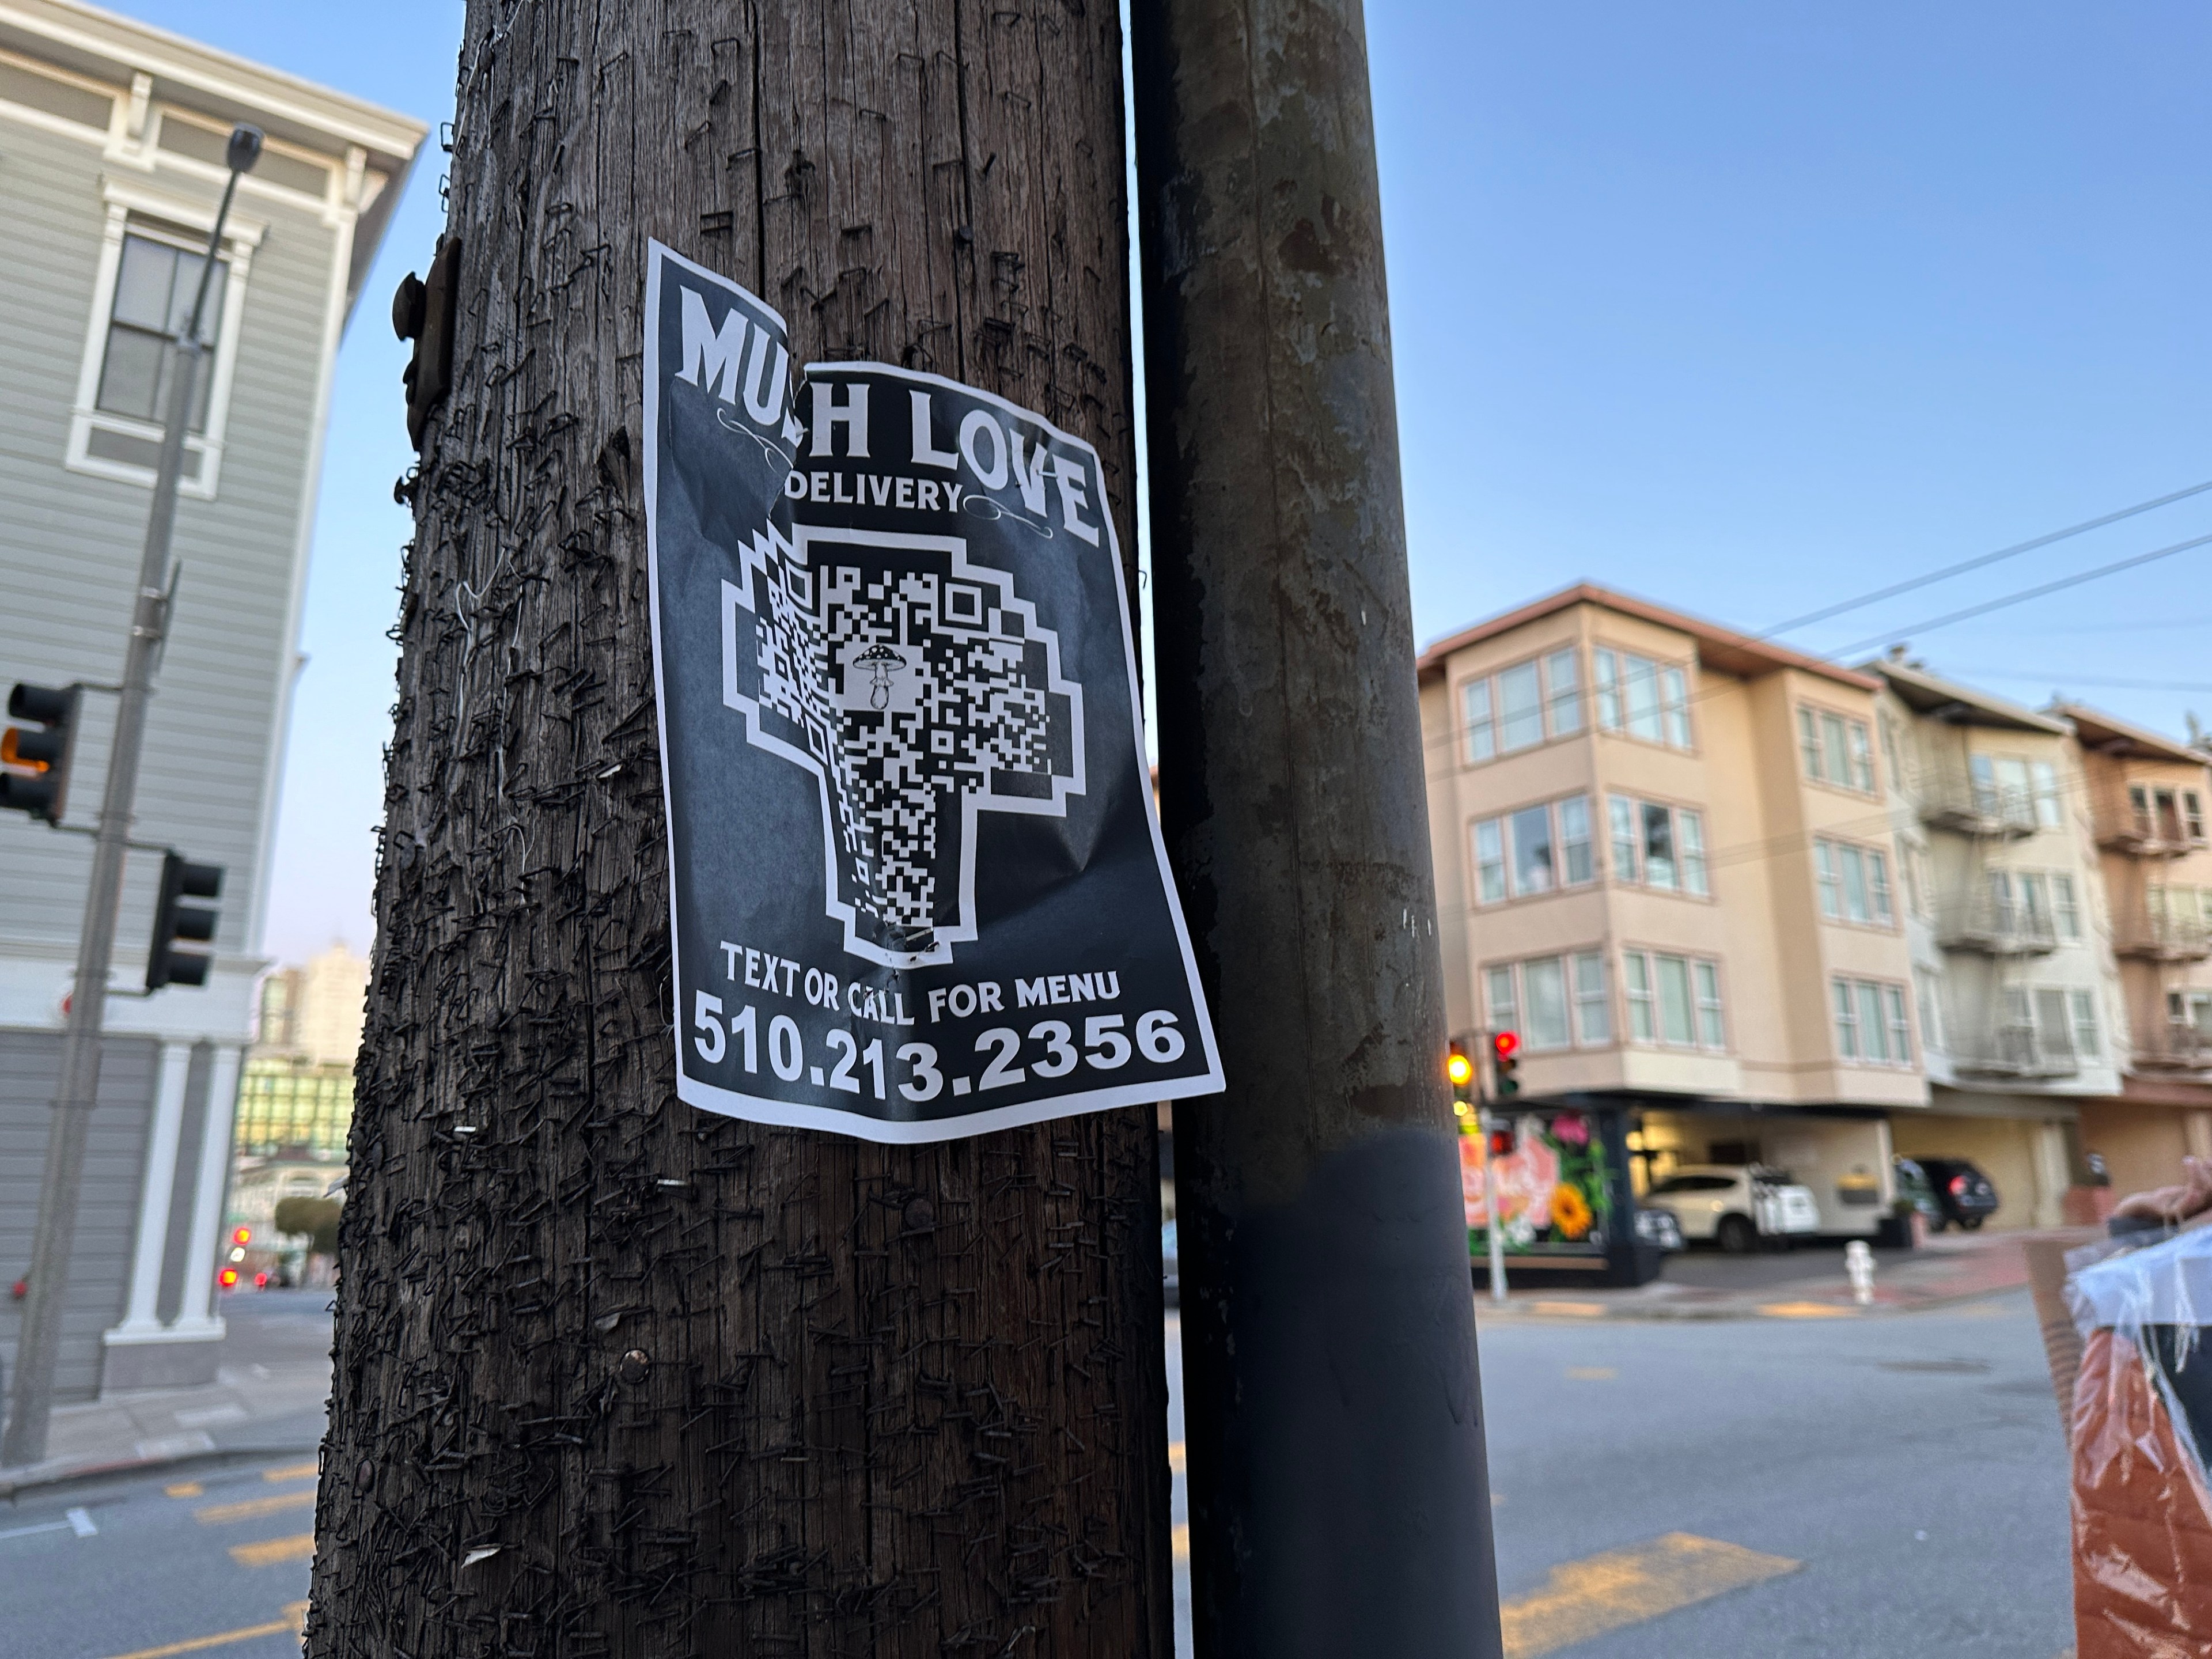 A flyer with a QR code on a utility pole advertises a magic mushroom delivery service with a phone number. Background shows urban street with buildings.